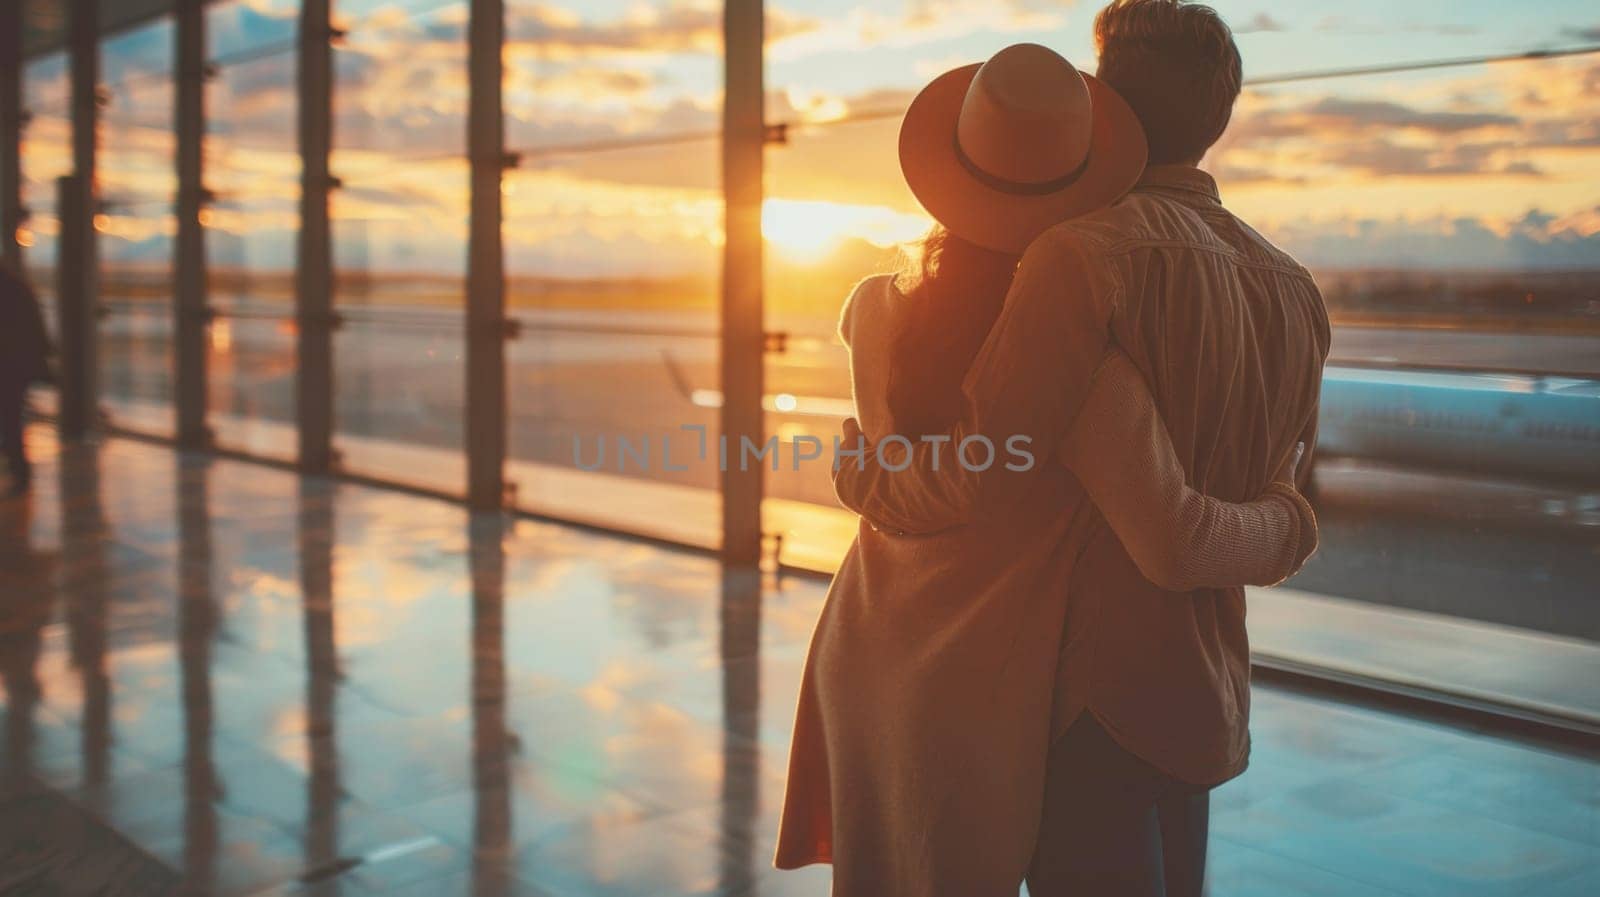 A couple embracing at an airport terminal window with a view of the sky